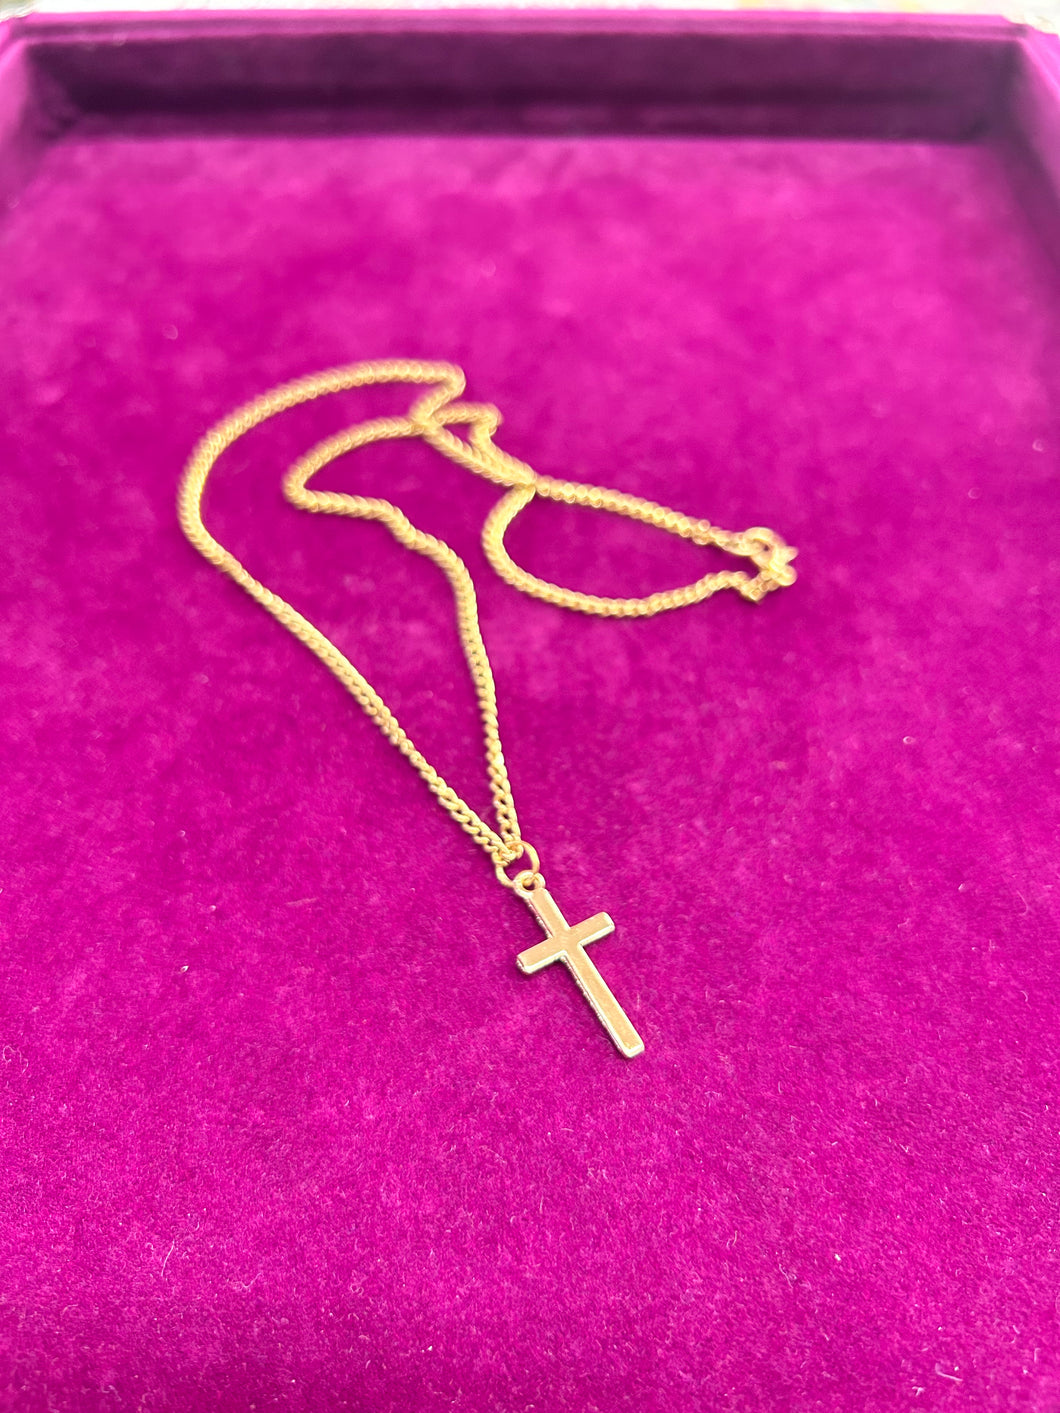 GOLD CROSS NECKLACE